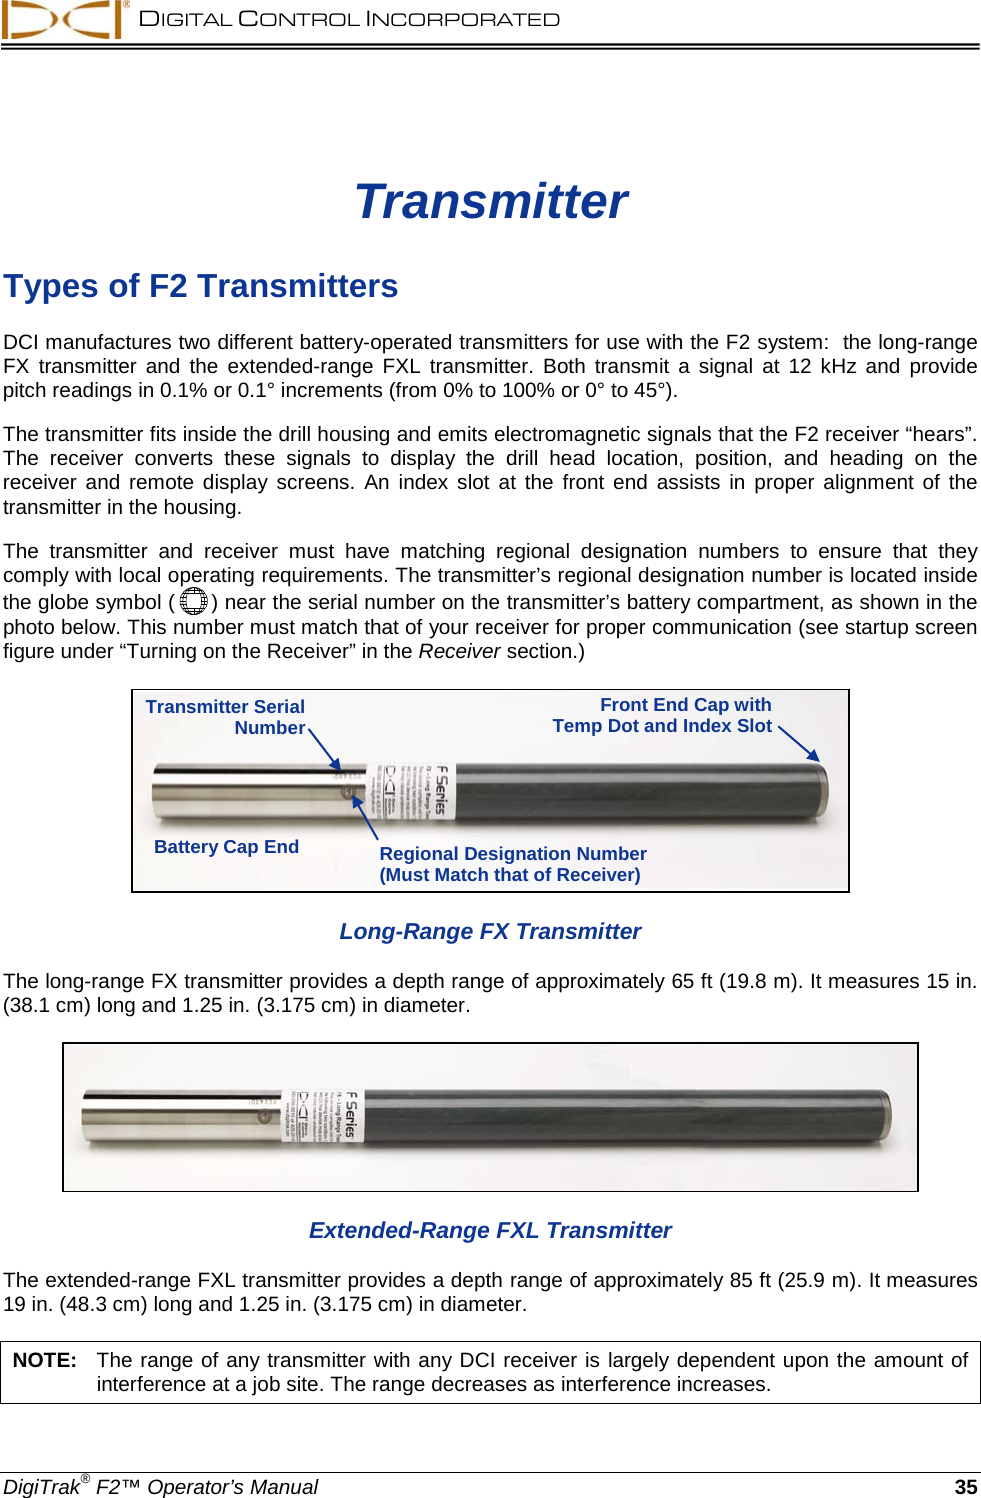  DIGITAL CONTROL INCORPORATED  DigiTrak® F2™ Operator’s Manual 35 Transmitter Types of F2 Transmitters DCI manufactures two different battery-operated transmitters for use with the F2 system:  the long-range FX transmitter and the extended-range FXL transmitter.  Both transmit a signal at 12  kHz and provide pitch readings in 0.1% or 0.1° increments (from 0% to 100% or 0° to 45°).  The transmitter fits inside the drill housing and emits electromagnetic signals that the F2 receiver “hears”. The receiver converts  these signals to display the drill head location, position, and heading on the receiver and remote display screens.  An index slot at the front end assists in proper alignment of the transmitter in the housing.  The transmitter and receiver must have matching regional  designation numbers to ensure that they comply with local operating requirements. The transmitter’s regional designation number is located inside the globe symbol (  ) near the serial number on the transmitter’s battery compartment, as shown in the photo below. This number must match that of your receiver for proper communication (see startup screen figure under “Turning on the Receiver” in the Receiver section.)  Long-Range FX Transmitter The long-range FX transmitter provides a depth range of approximately 65 ft (19.8 m). It measures 15 in. (38.1 cm) long and 1.25 in. (3.175 cm) in diameter.   Extended-Range FXL Transmitter The extended-range FXL transmitter provides a depth range of approximately 85 ft (25.9 m). It measures 19 in. (48.3 cm) long and 1.25 in. (3.175 cm) in diameter.  NOTE:   The range of any transmitter with any DCI receiver is largely dependent upon the amount of interference at a job site. The range decreases as interference increases. Transmitter Serial Number Regional Designation Number (Must Match that of Receiver) Battery Cap End Front End Cap with Temp Dot and Index Slot 